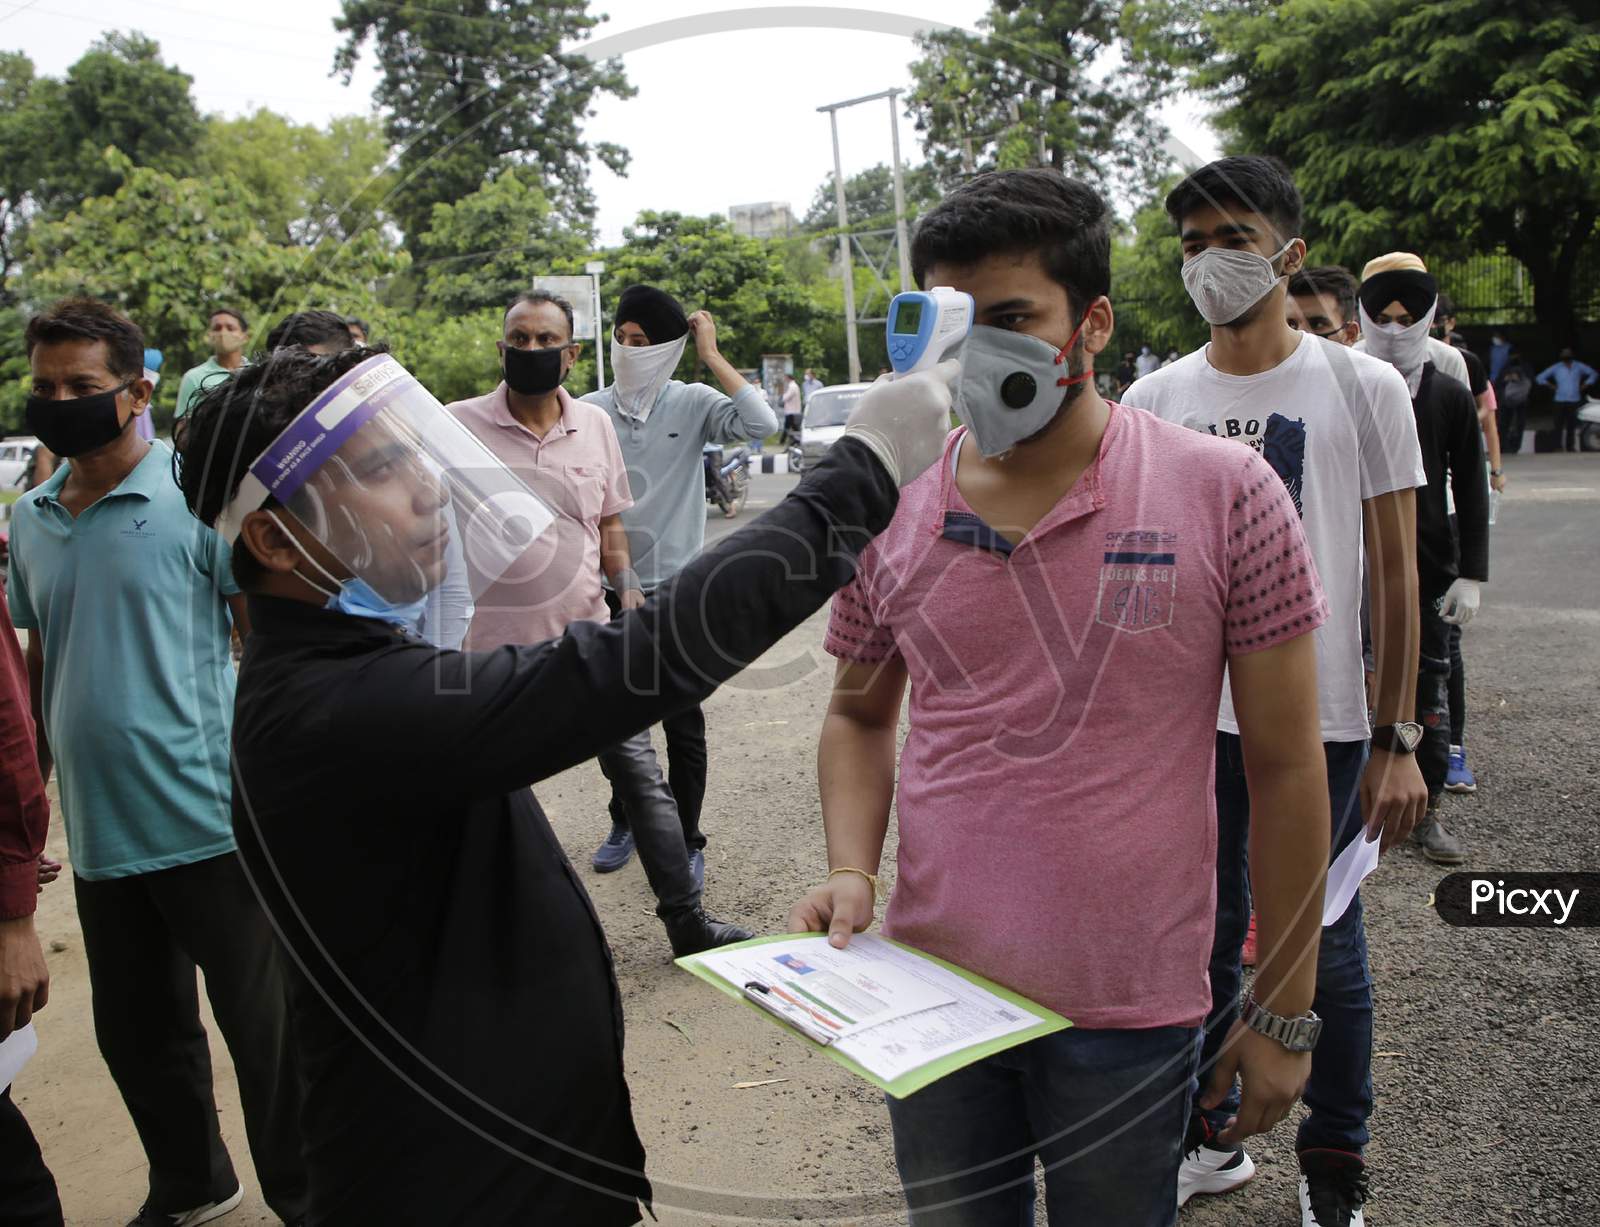 National Defence Academy (NDA) aspirants being screened as per COVID-19 protocol before allowing into an examination centre in Jammu August 6, 2020.